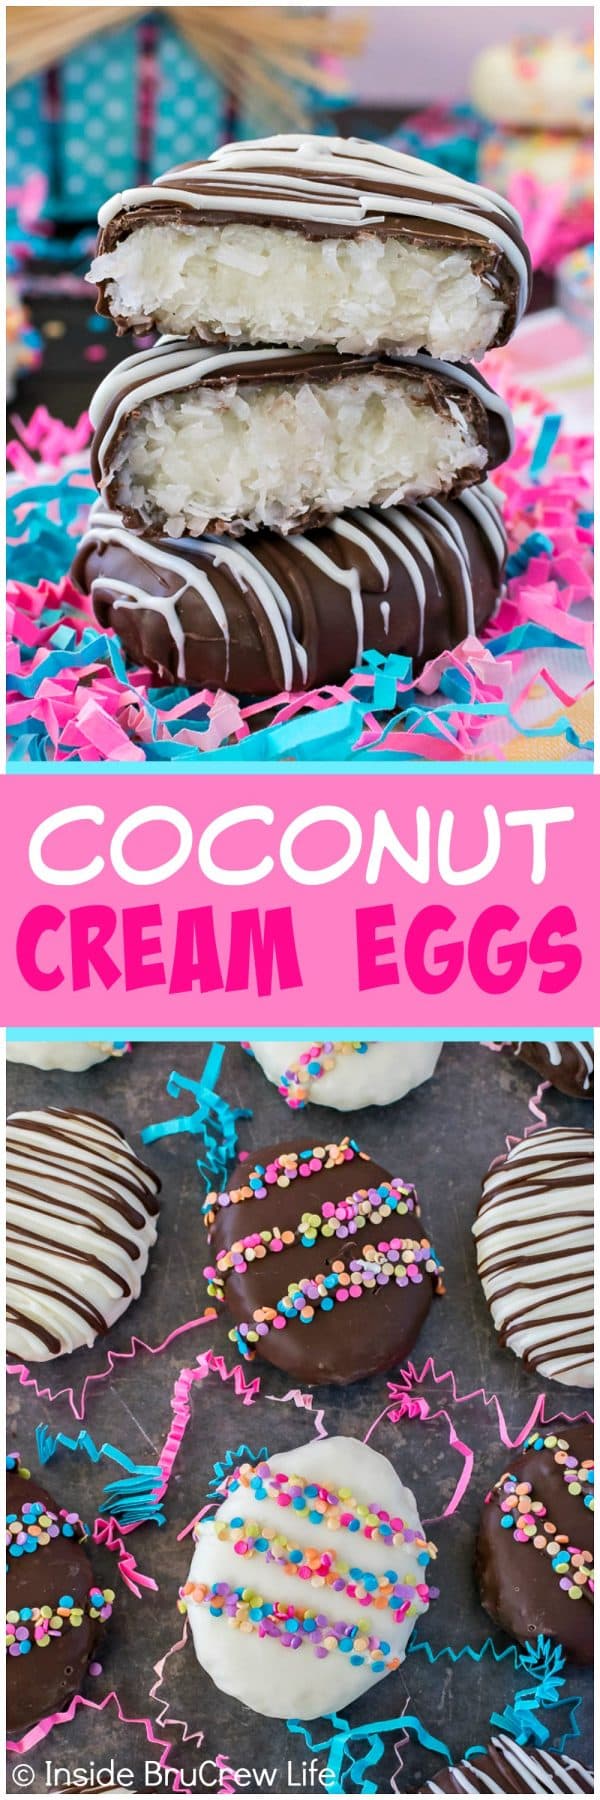 Coconut Cream Eggs - a homemade coconut filling shaped into an egg and dipped in chocolate makes a fun homemade Easter candy! Great for filling holiday baskets with!